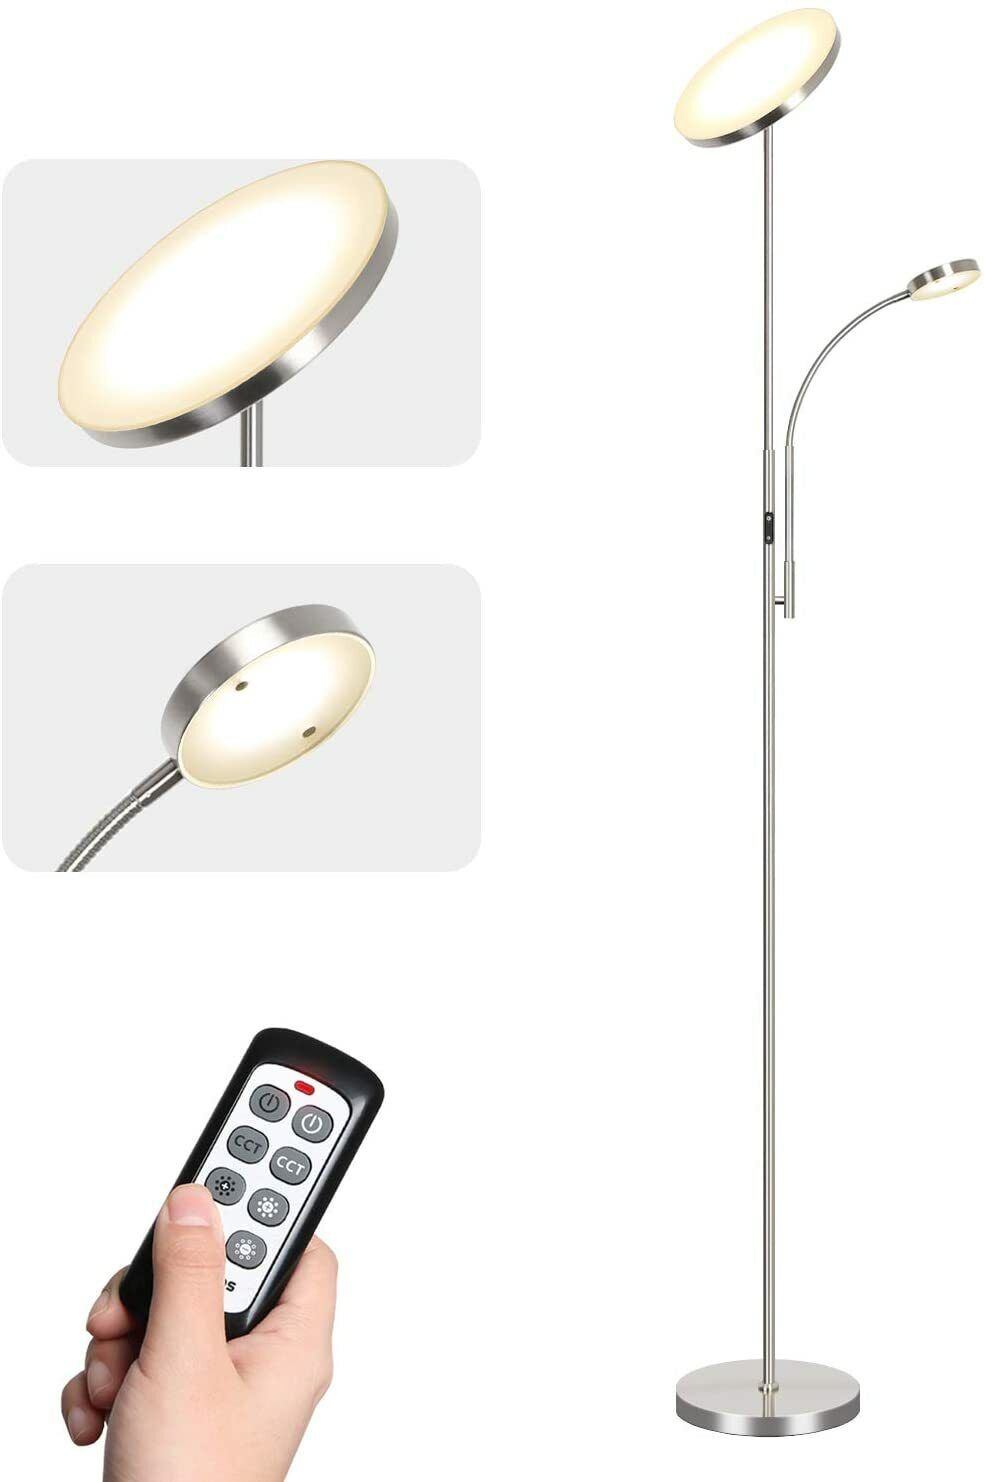 Stehlampe LED Dimmbar Standleuchte Stufenlos Dimmbar mit Verstellbare Leselampe